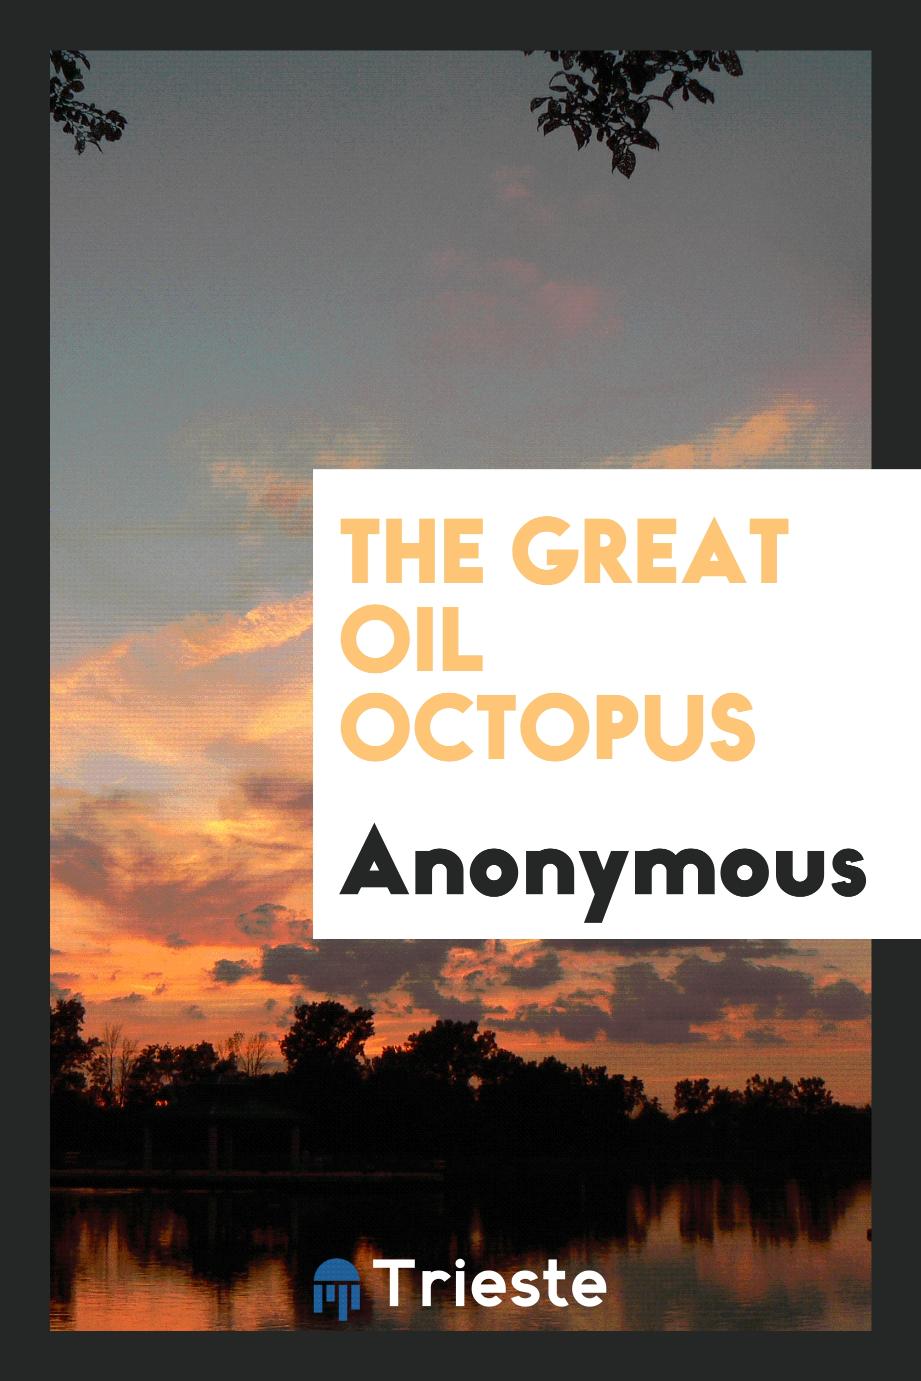 The great oil octopus